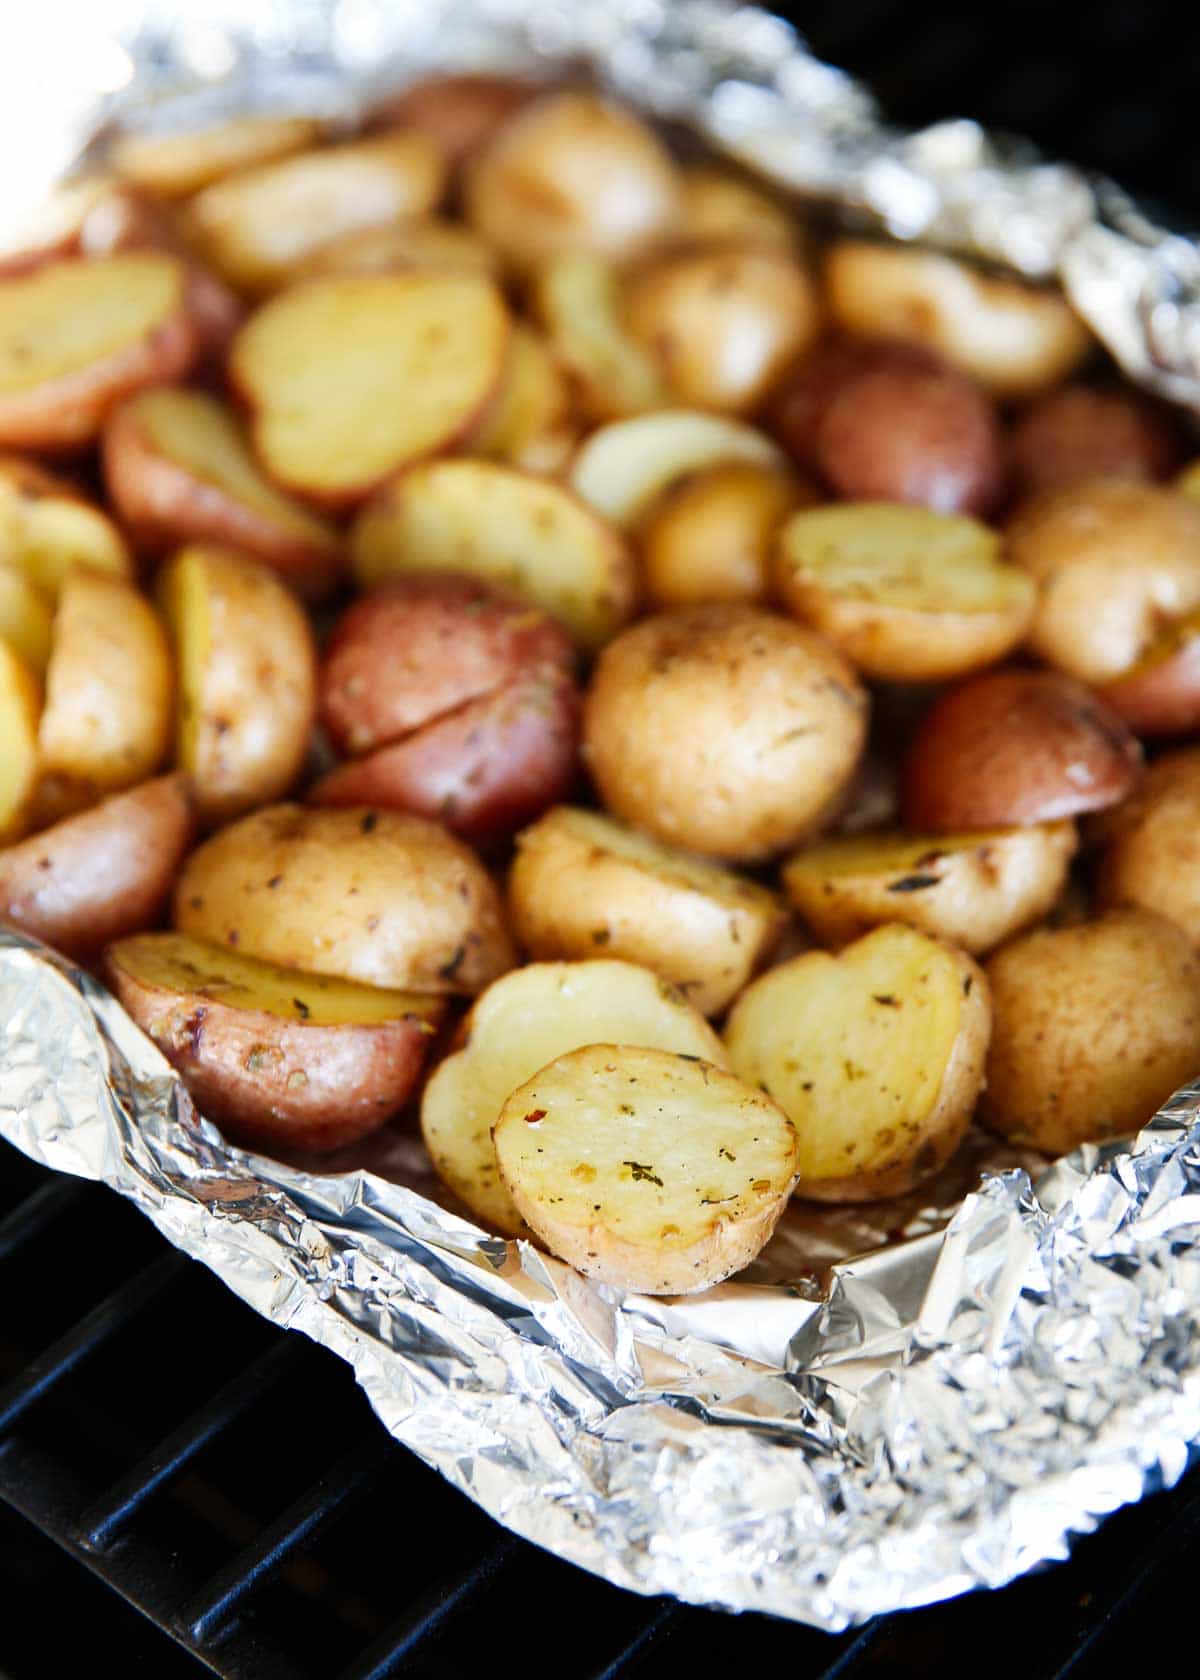 Grilled potatoes cooking in tin foil.